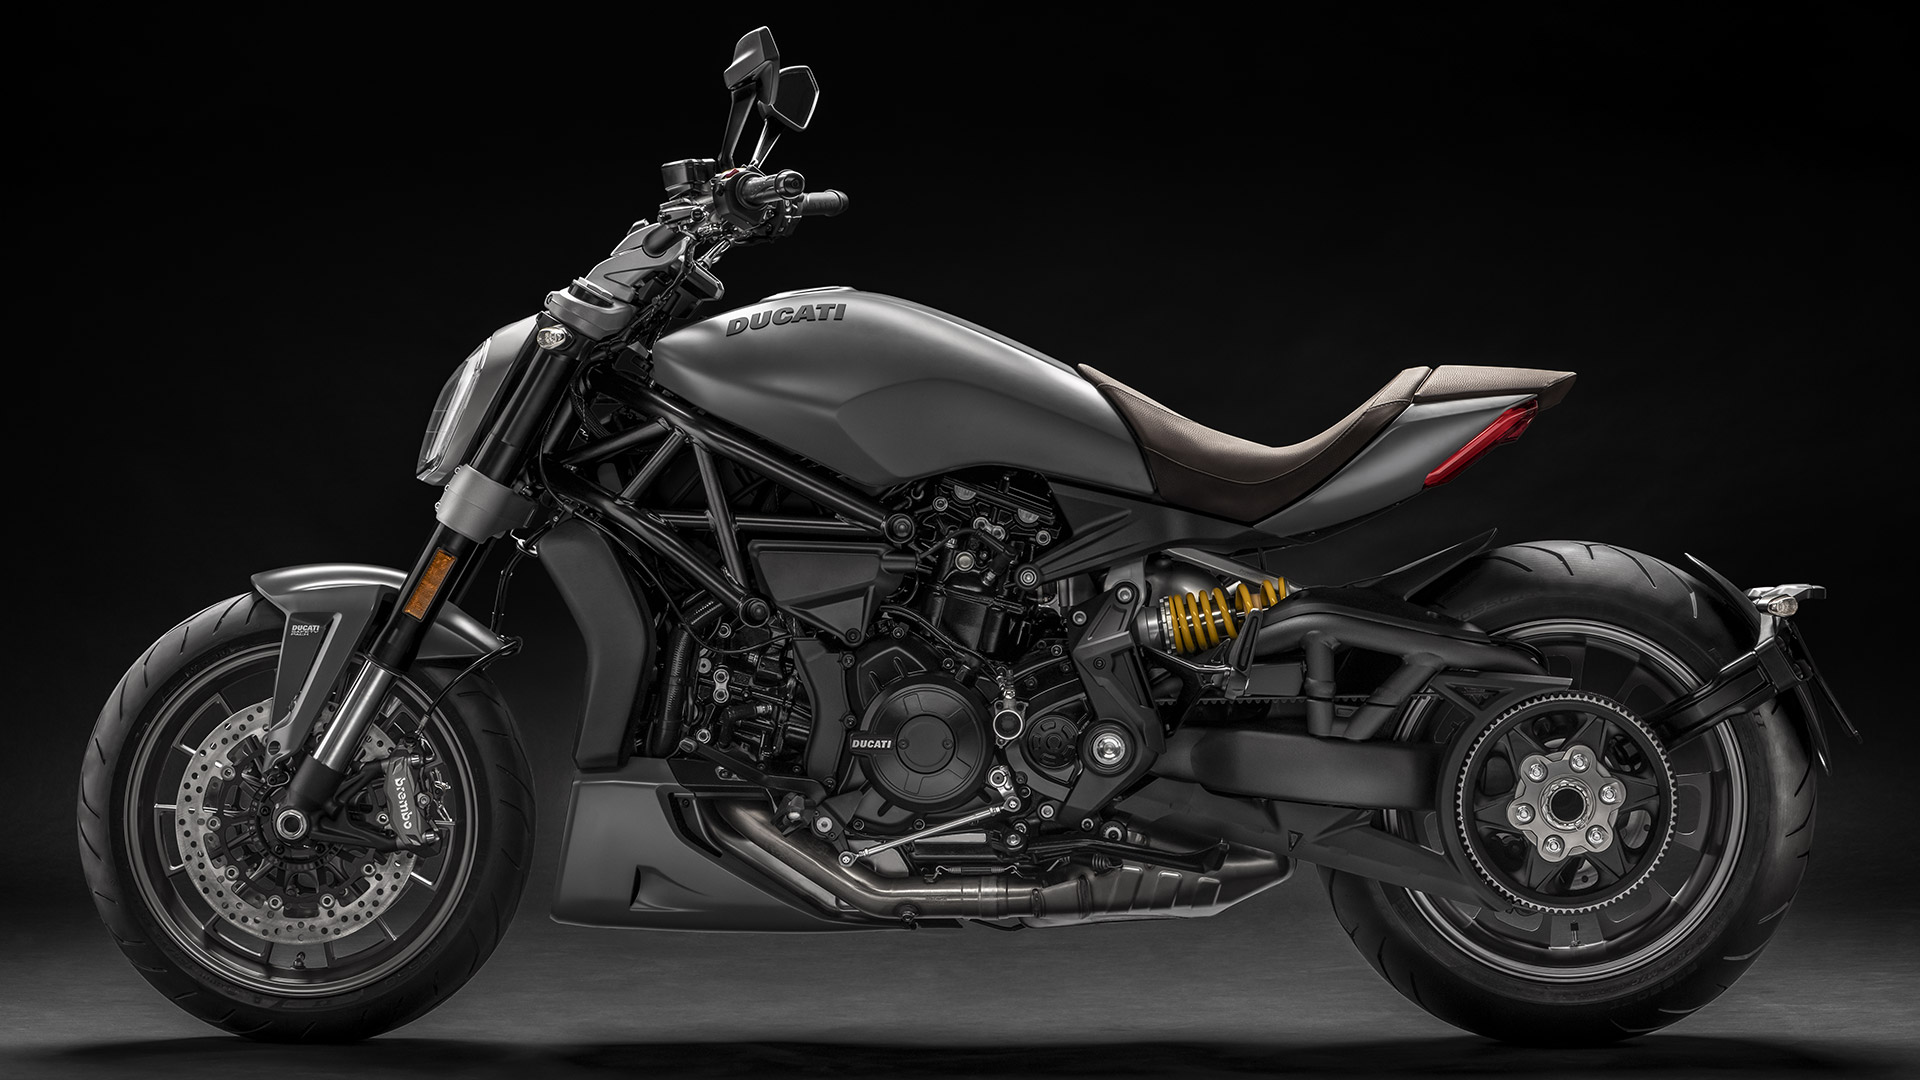 A New Colour For The Xdiavel - 2019 Ducati X Diavel , HD Wallpaper & Backgrounds